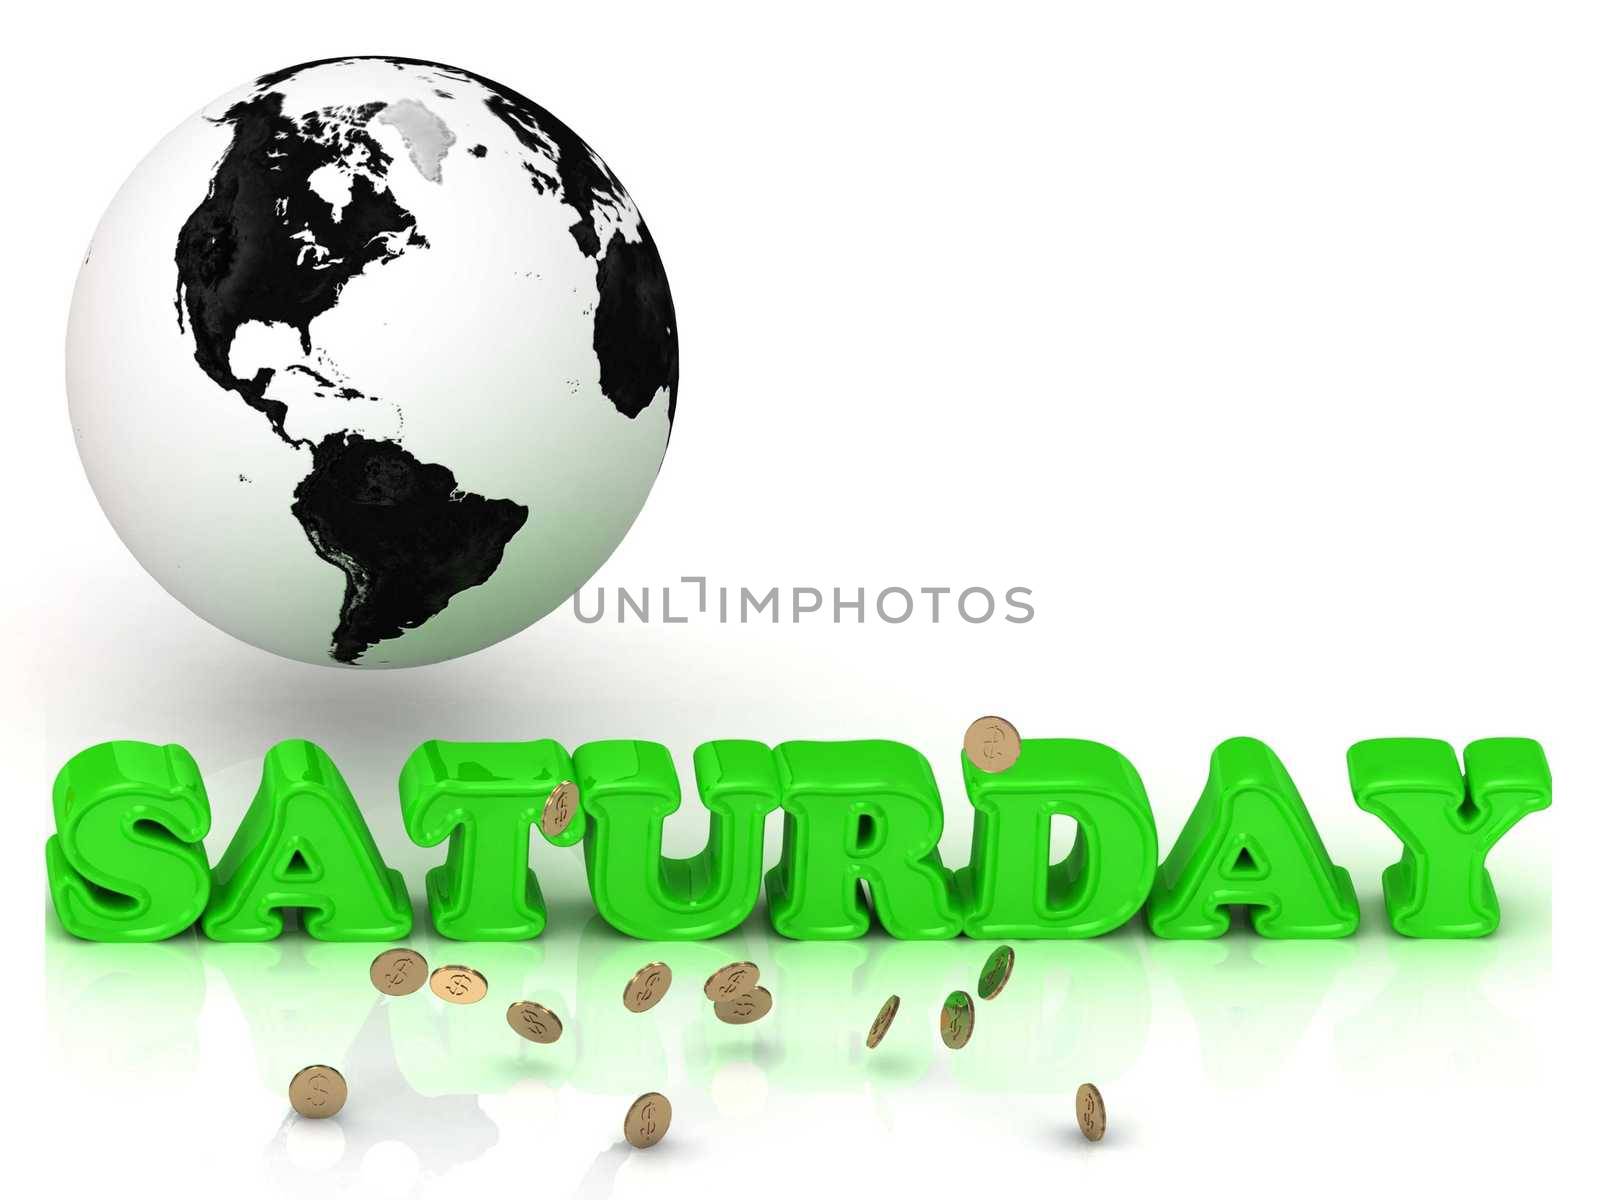 SATURDAY- bright color letters, black and white Earth on a white background